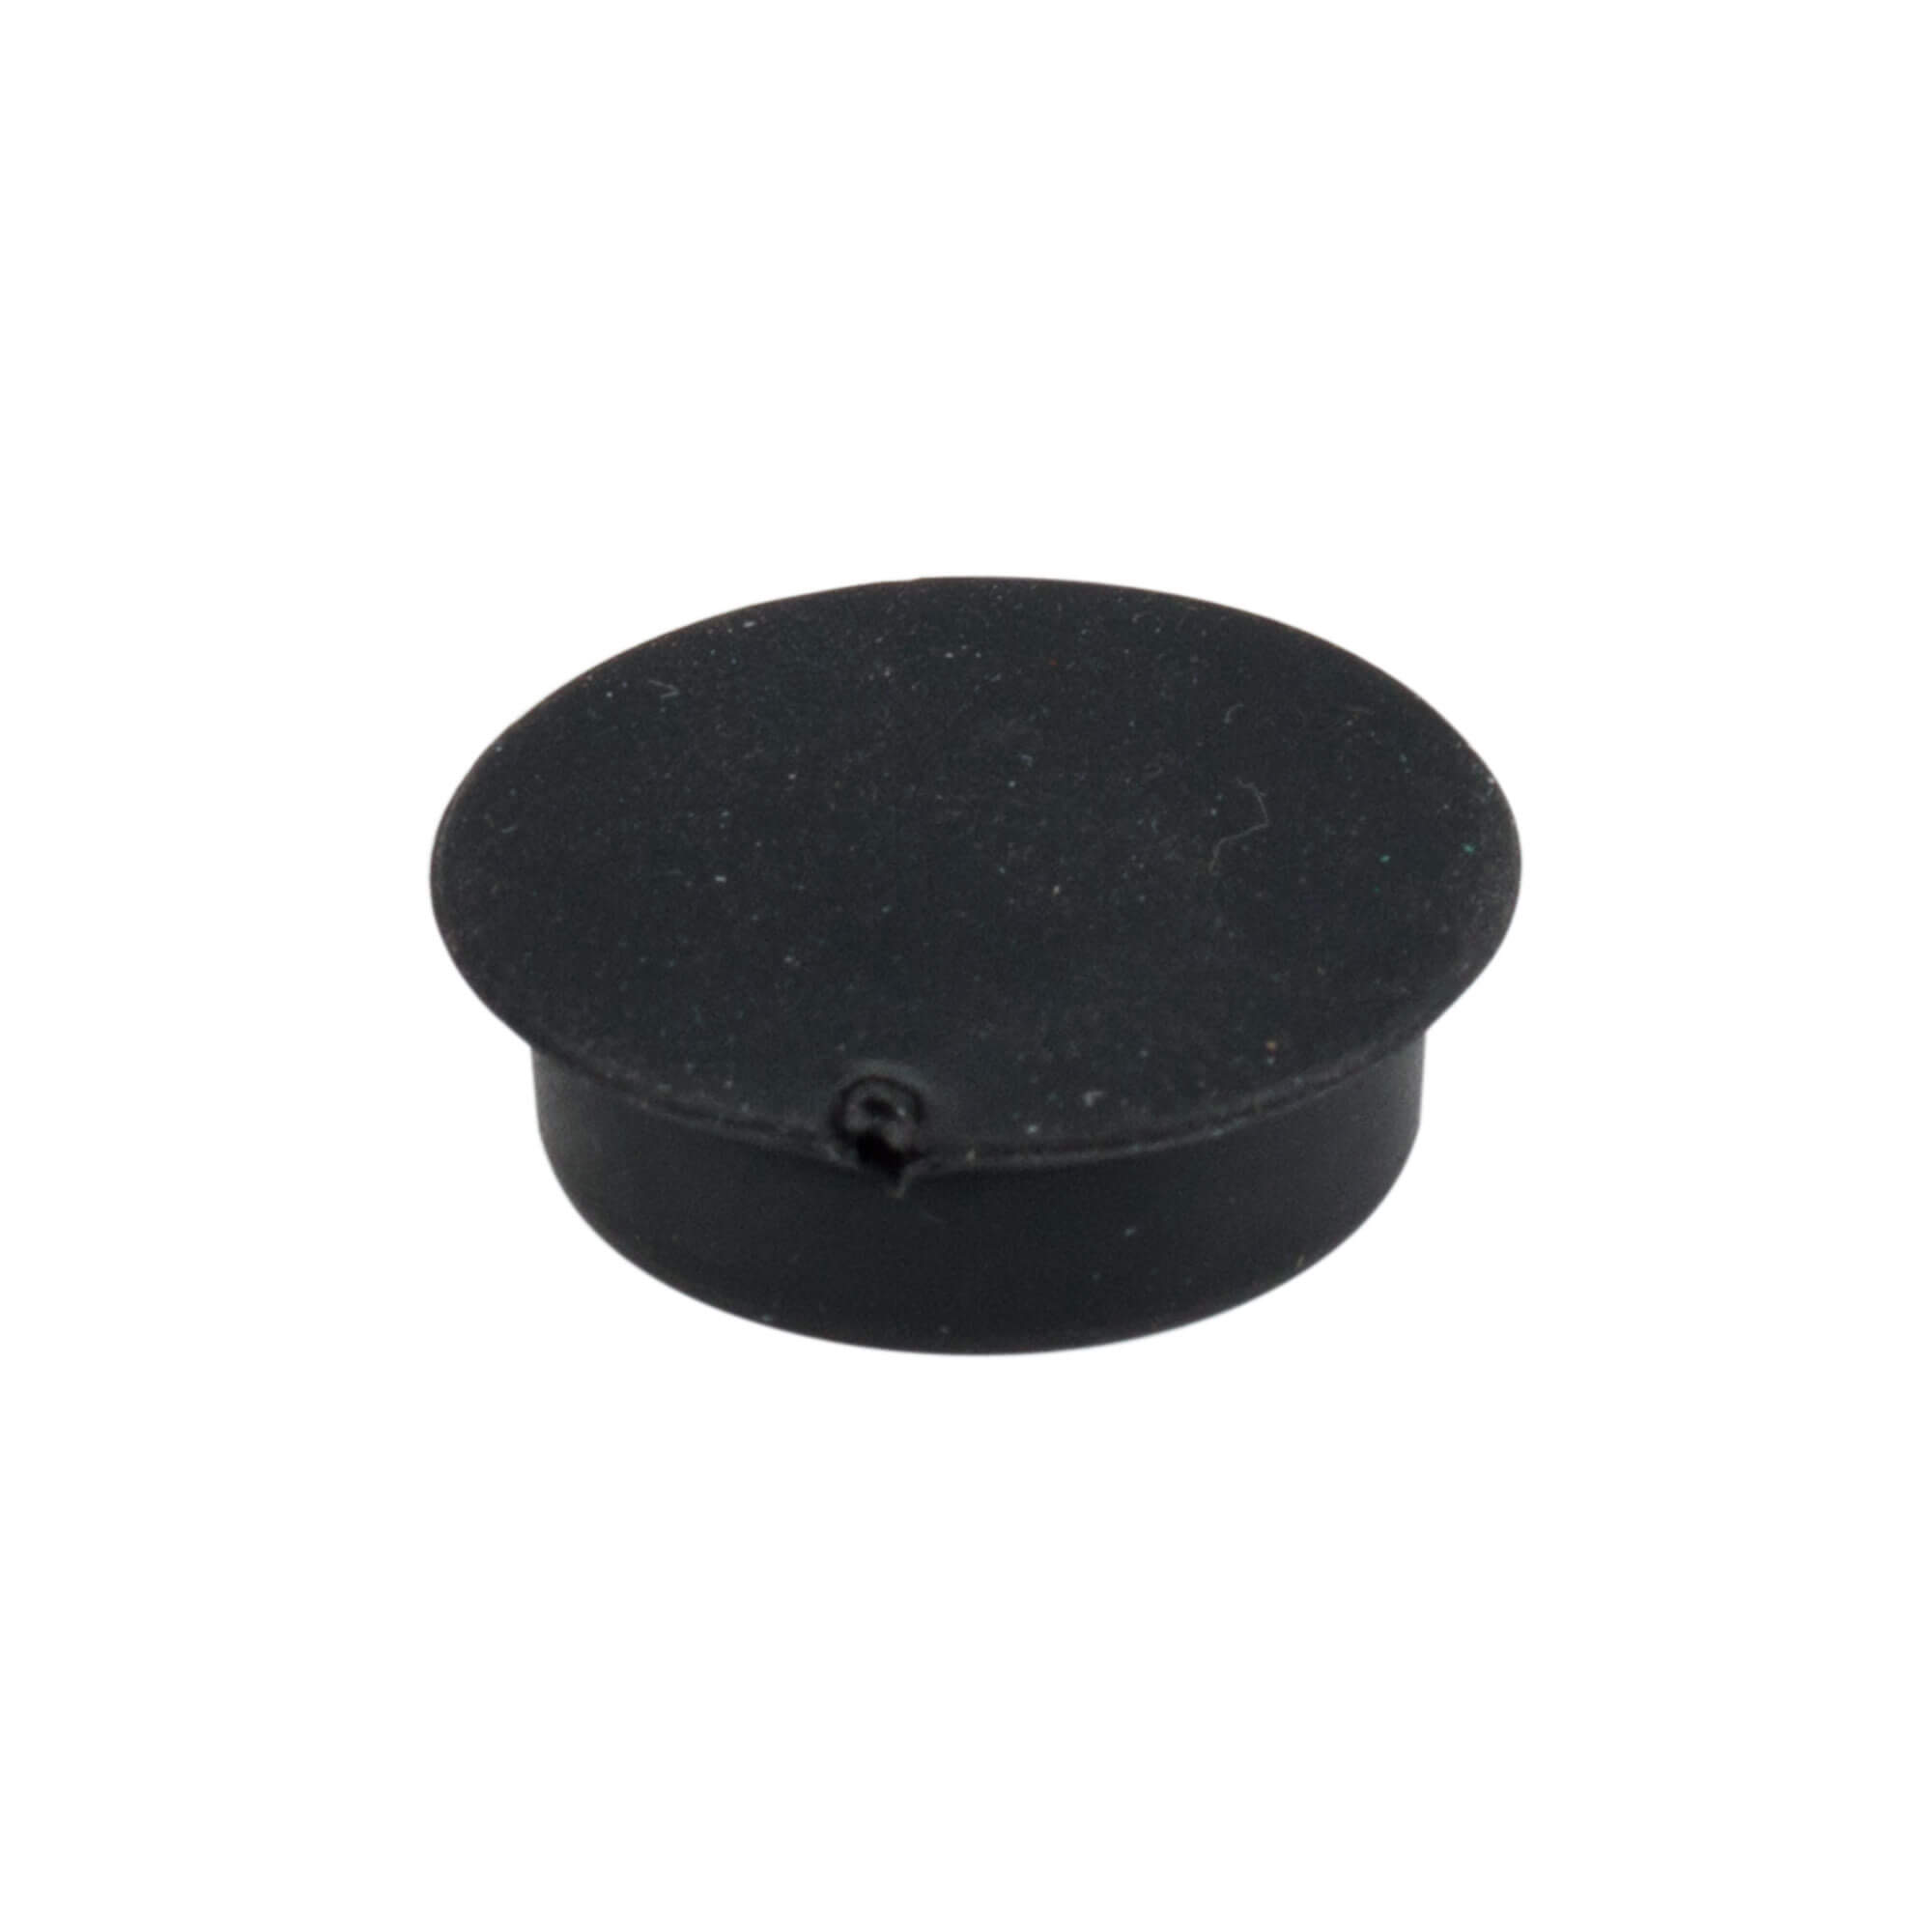 Arm stopper - spare part for Cancan manual juicer